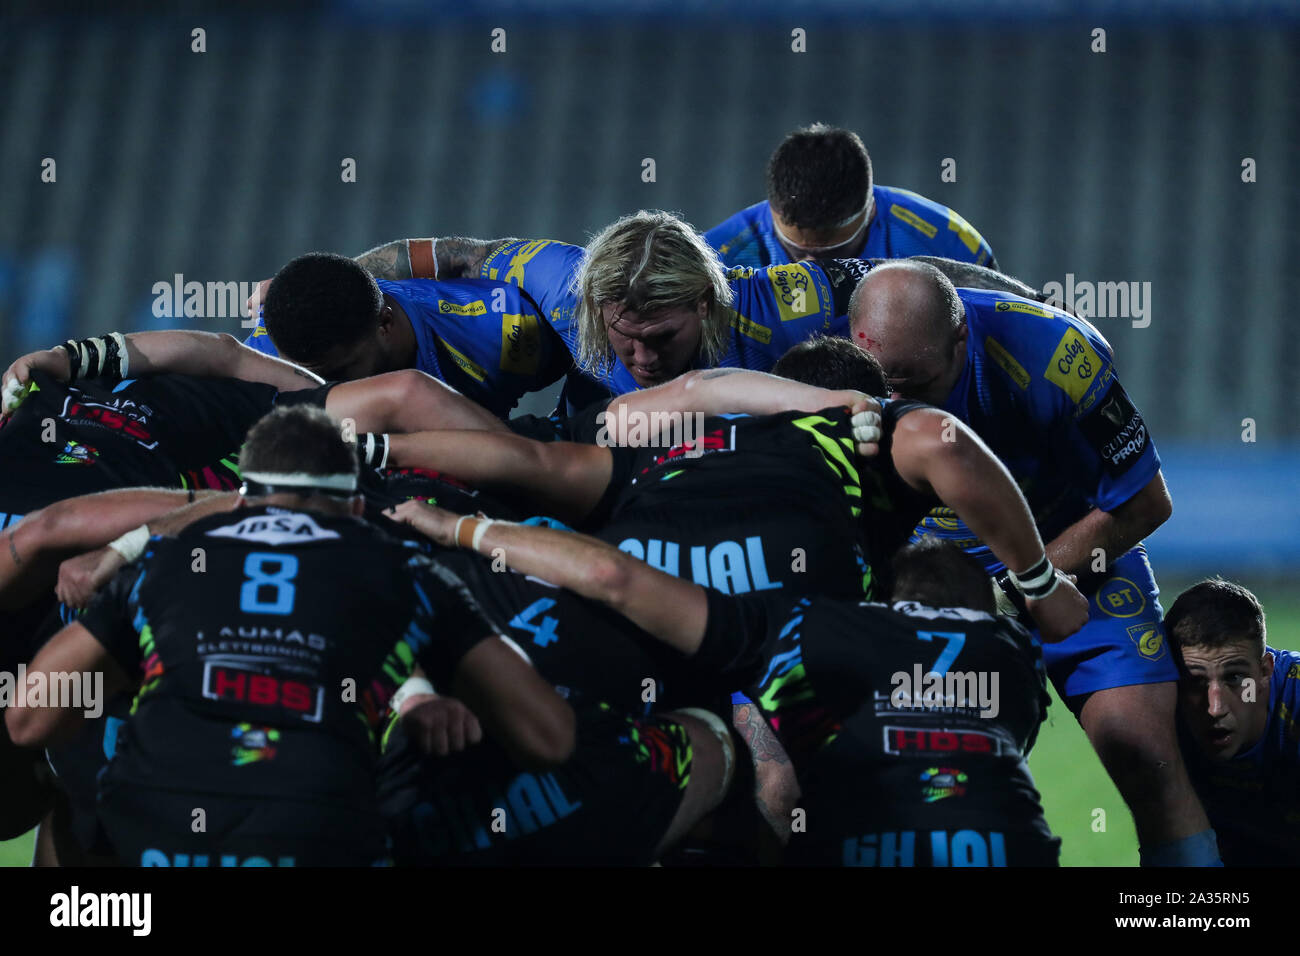 Prima Of Una Mischia Durante Zebre Against Dragons During Zebre Rugby Vs Dragons Parma Italy 05 Oct 19 Rugby Rugby Guinness Pro 14 Stock Photo Alamy